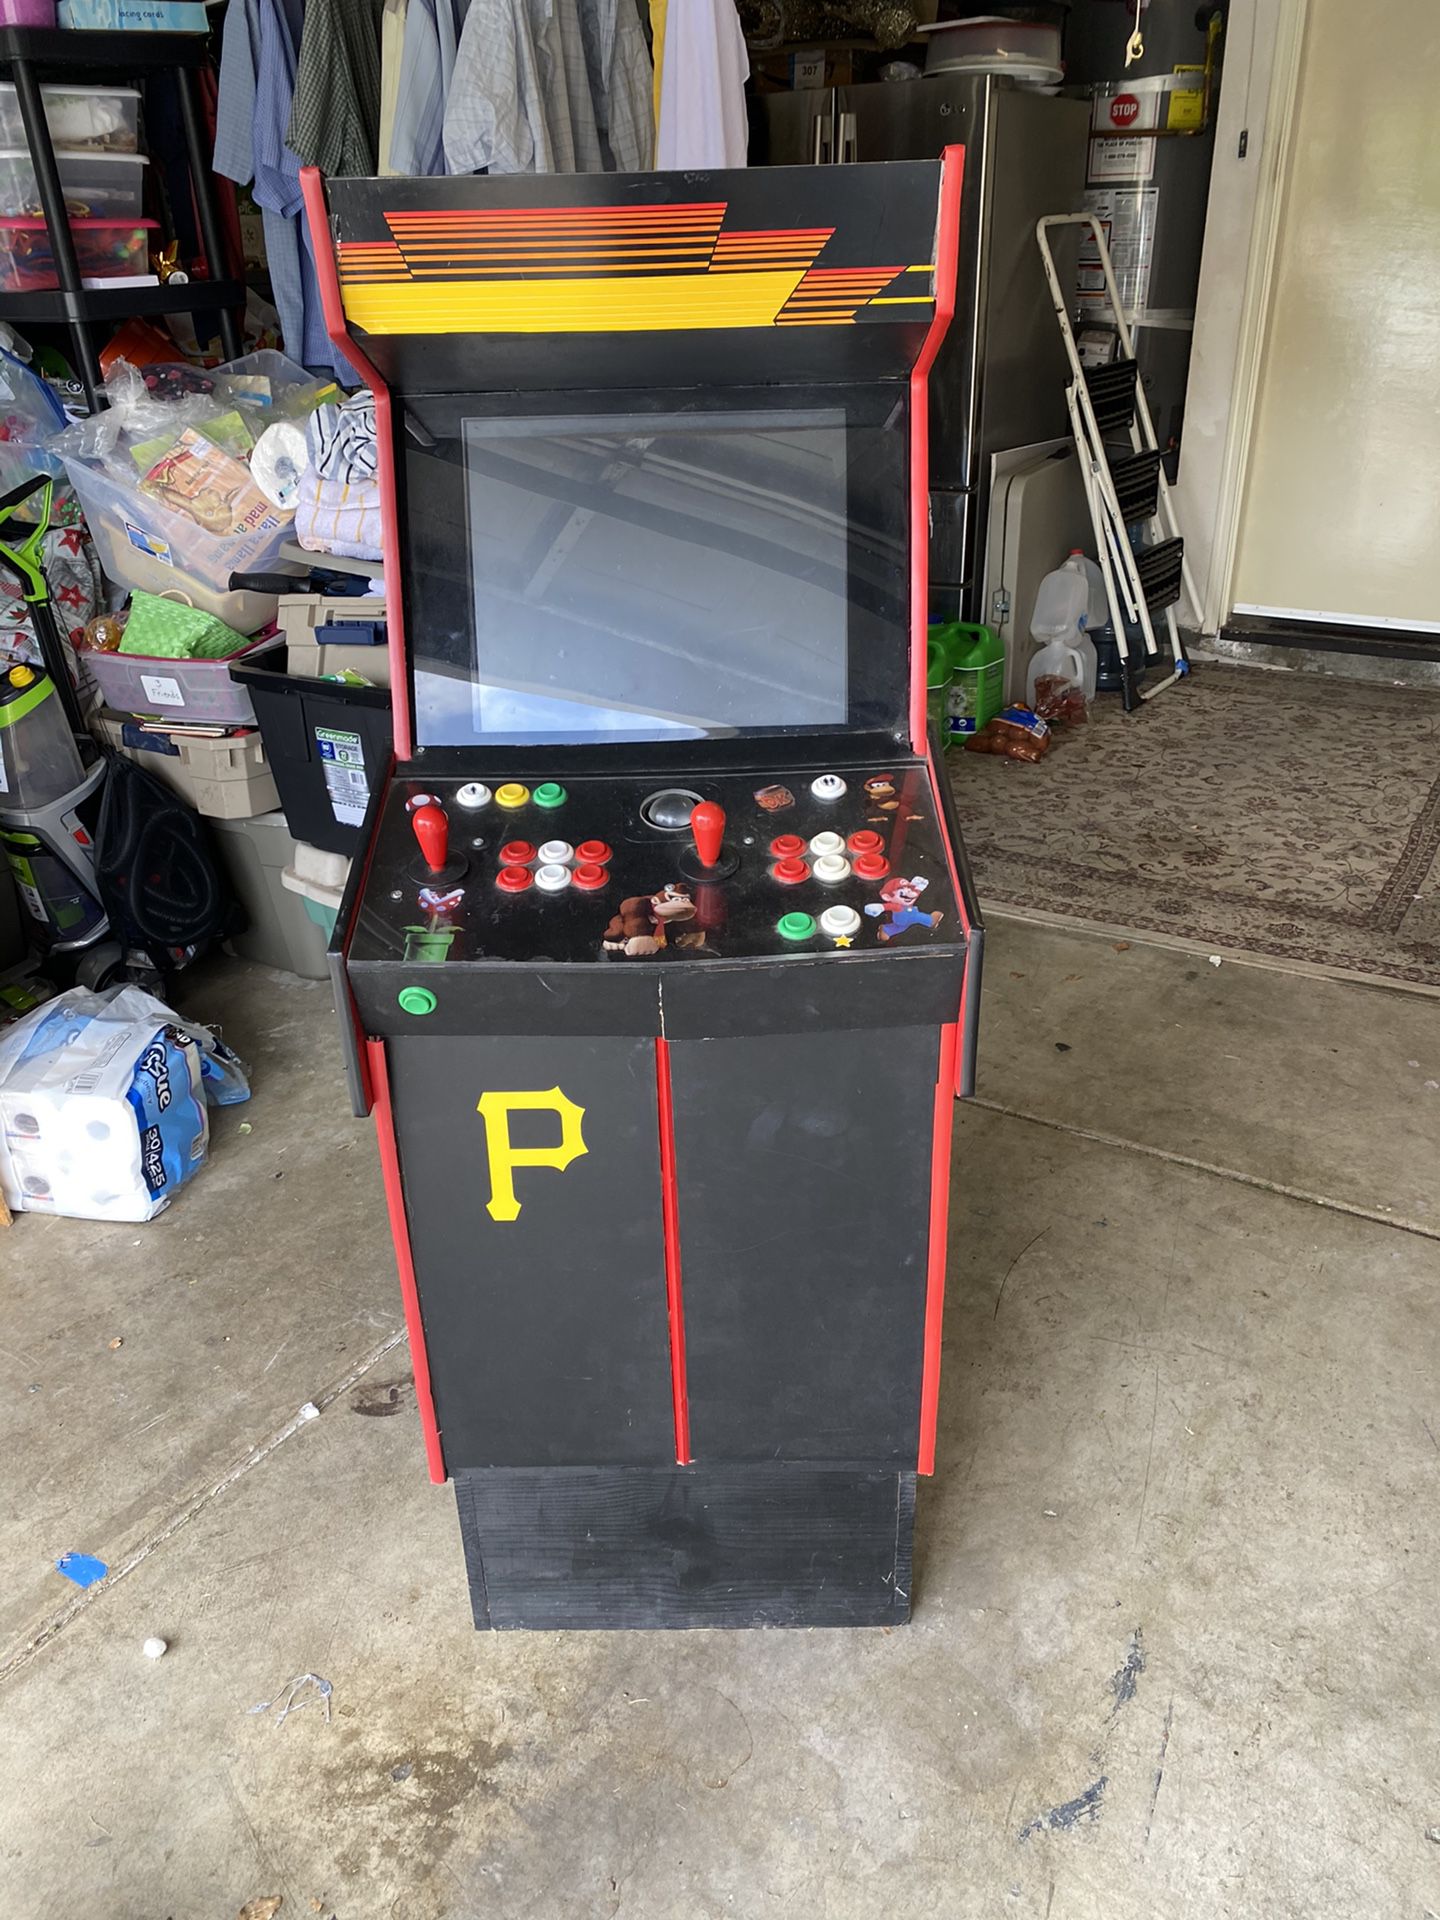 MAME arcade (has programming issue)